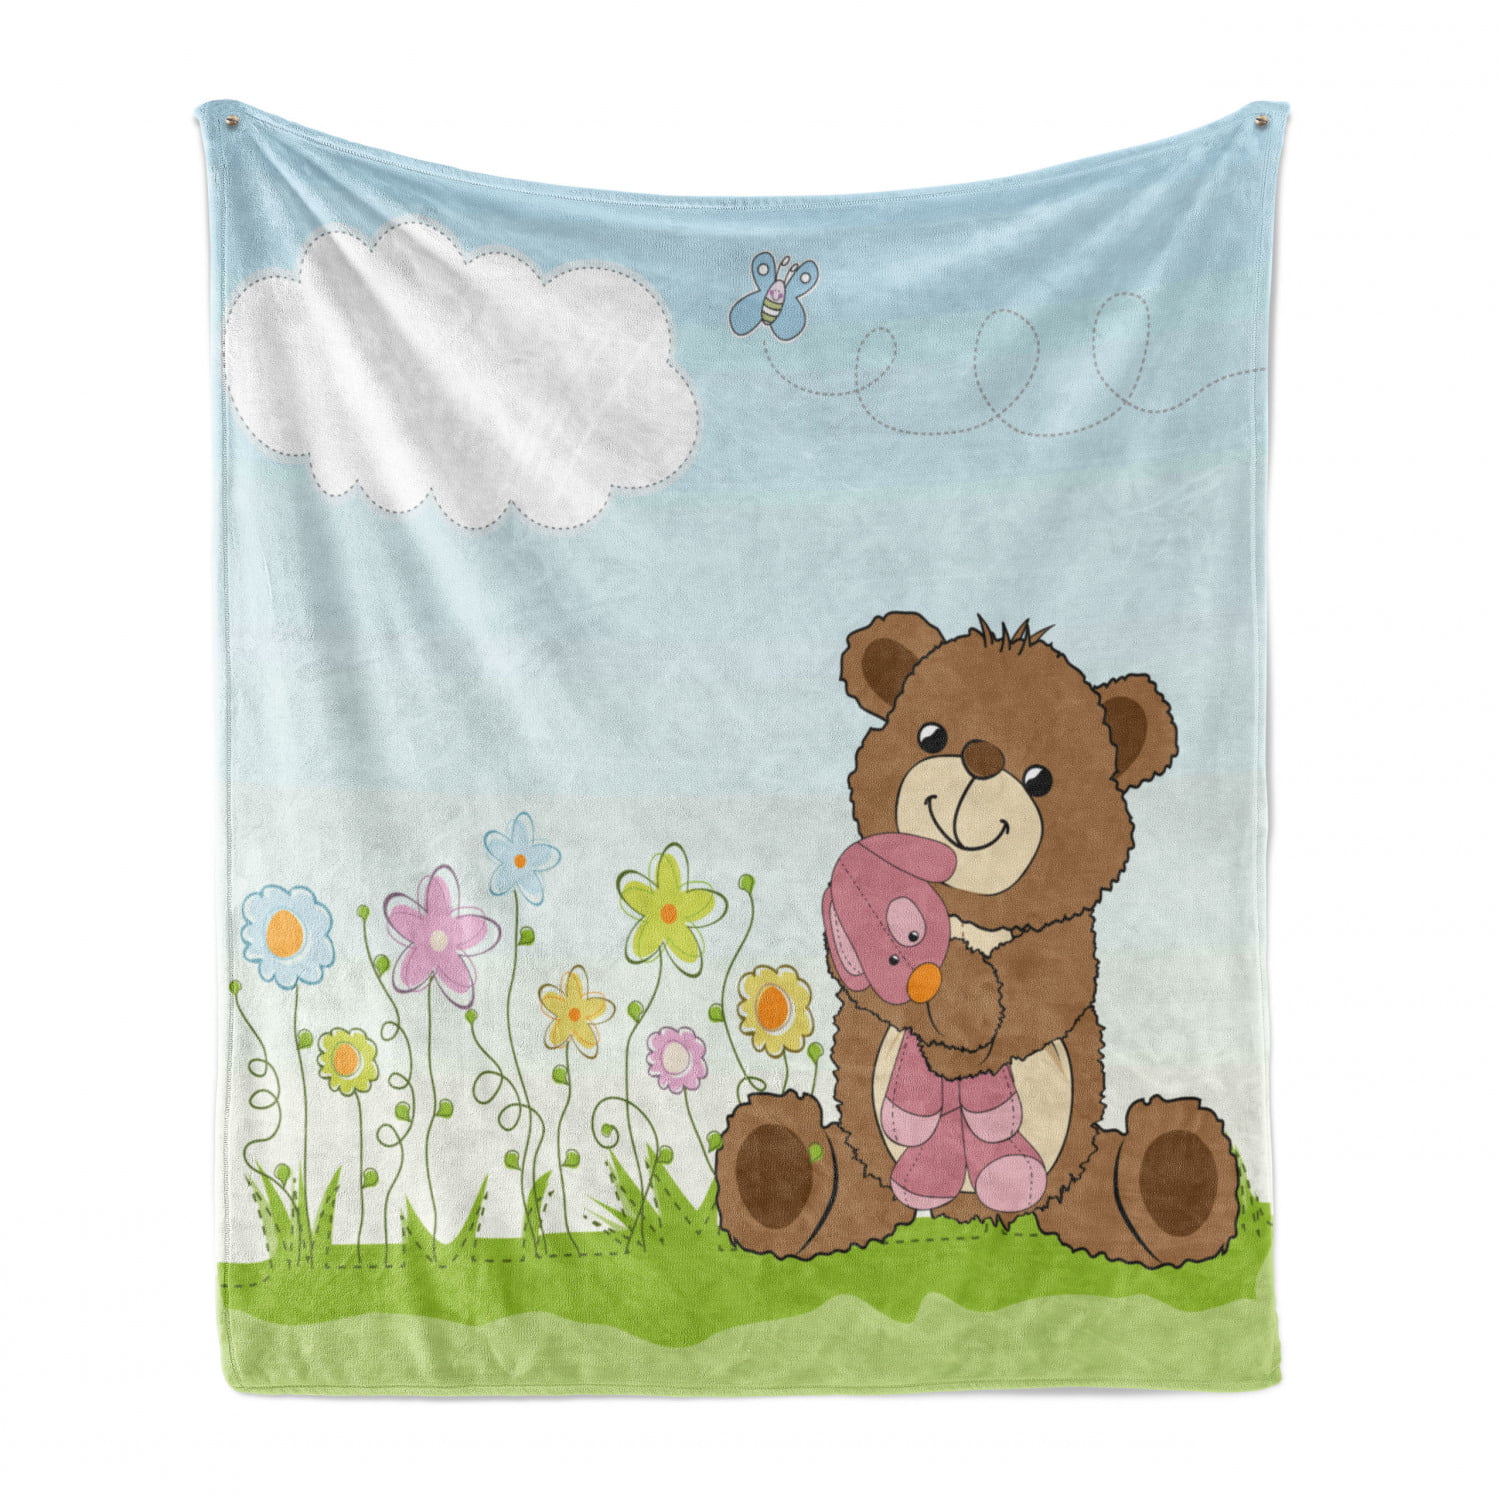 70 x 90 Cartoon Style Teddy Bear with Toy in Meadow Swirled Flowers Butterfly and Cloud Multicolor Cozy Plush for Indoor and Outdoor Use Ambesonne Flower Soft Flannel Fleece Throw Blanket 